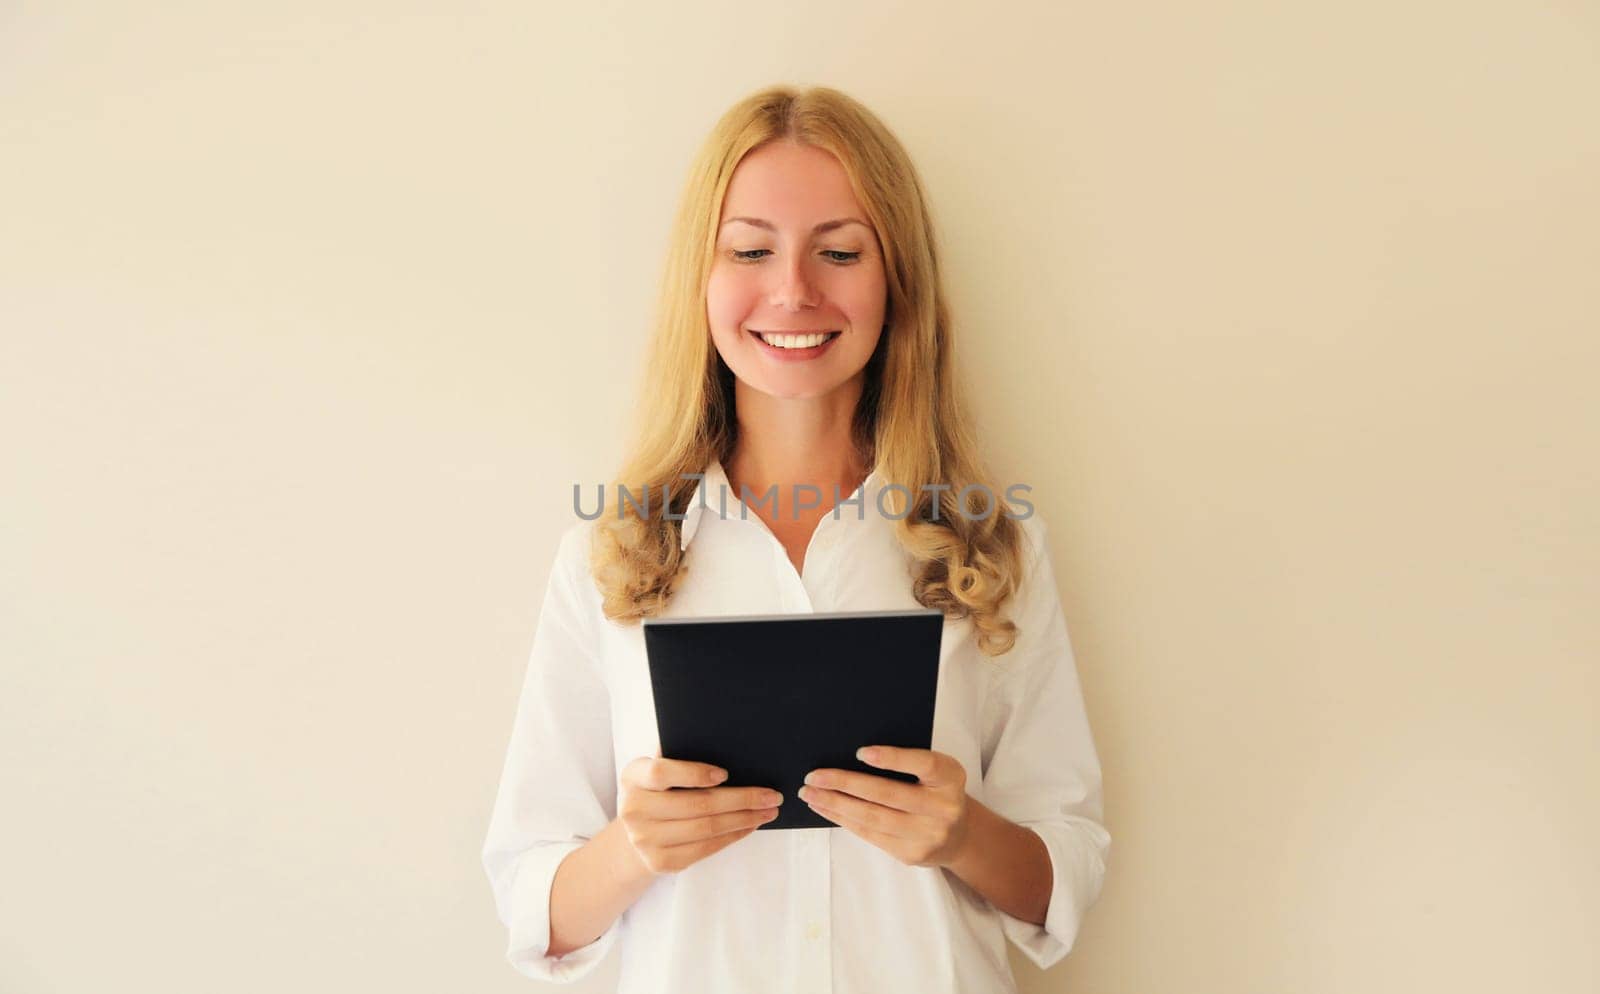 Portrait of happy smiling caucasian young woman employee with digital tablet computer or folder with documents in office